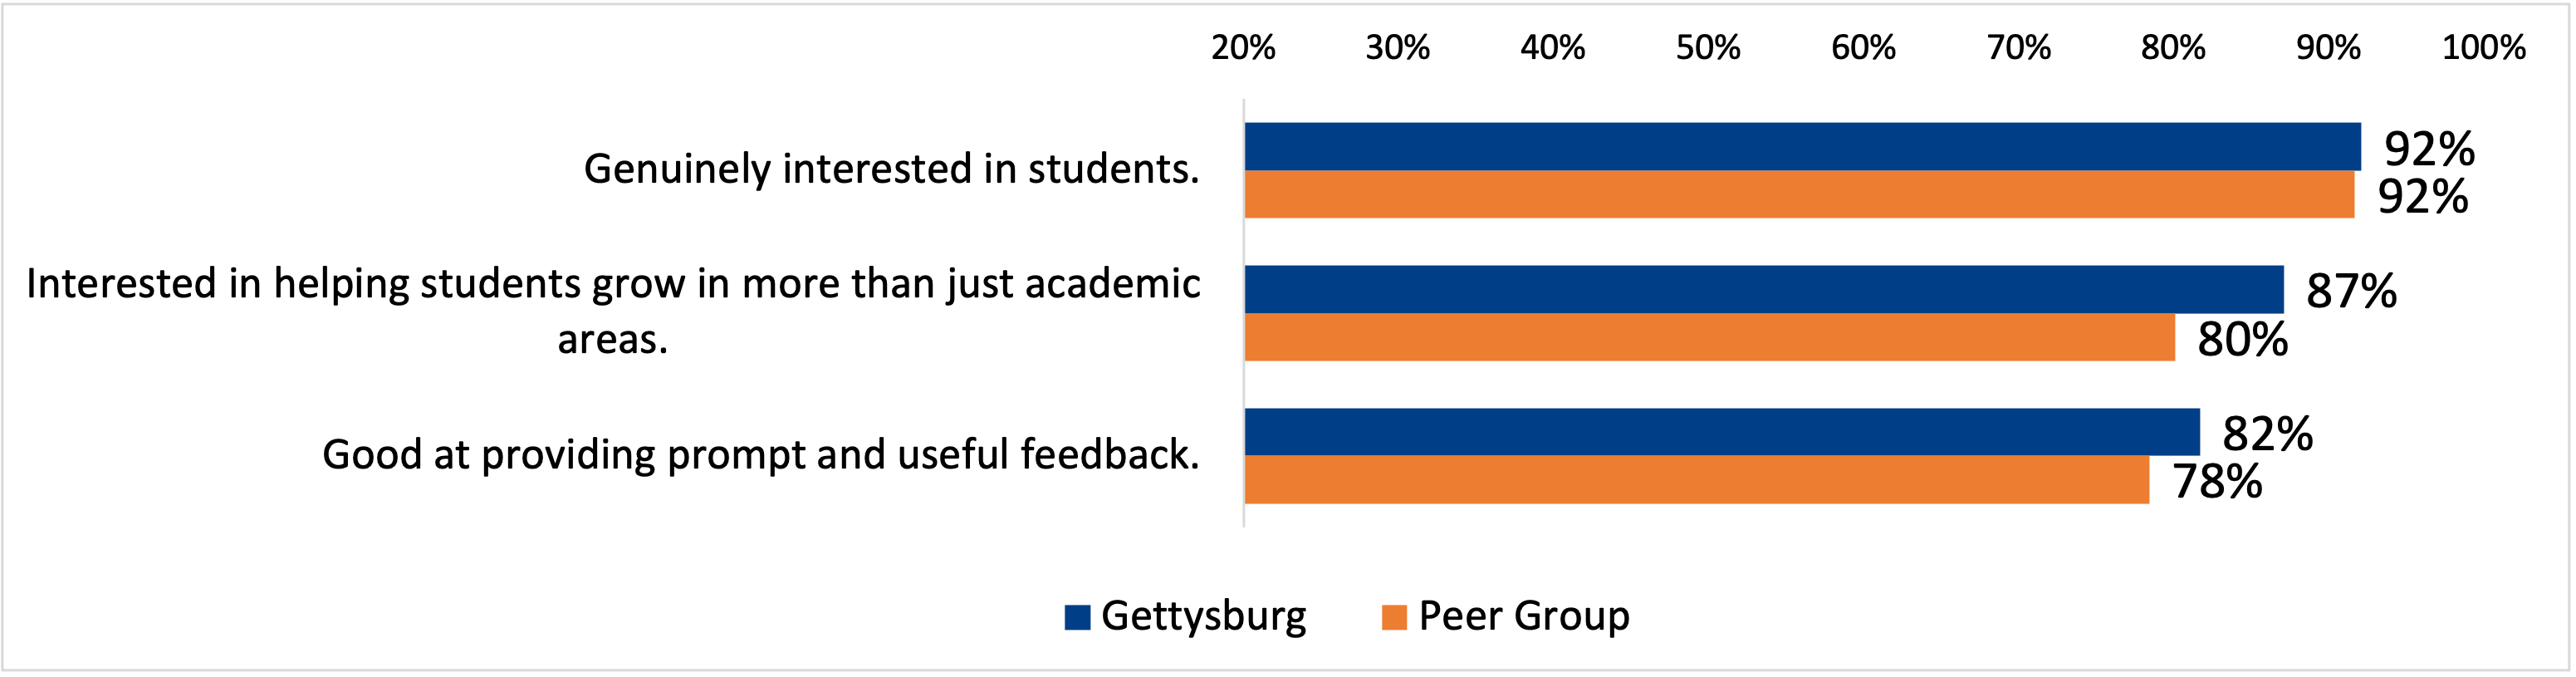 Academic Experiences chart - see table below for data